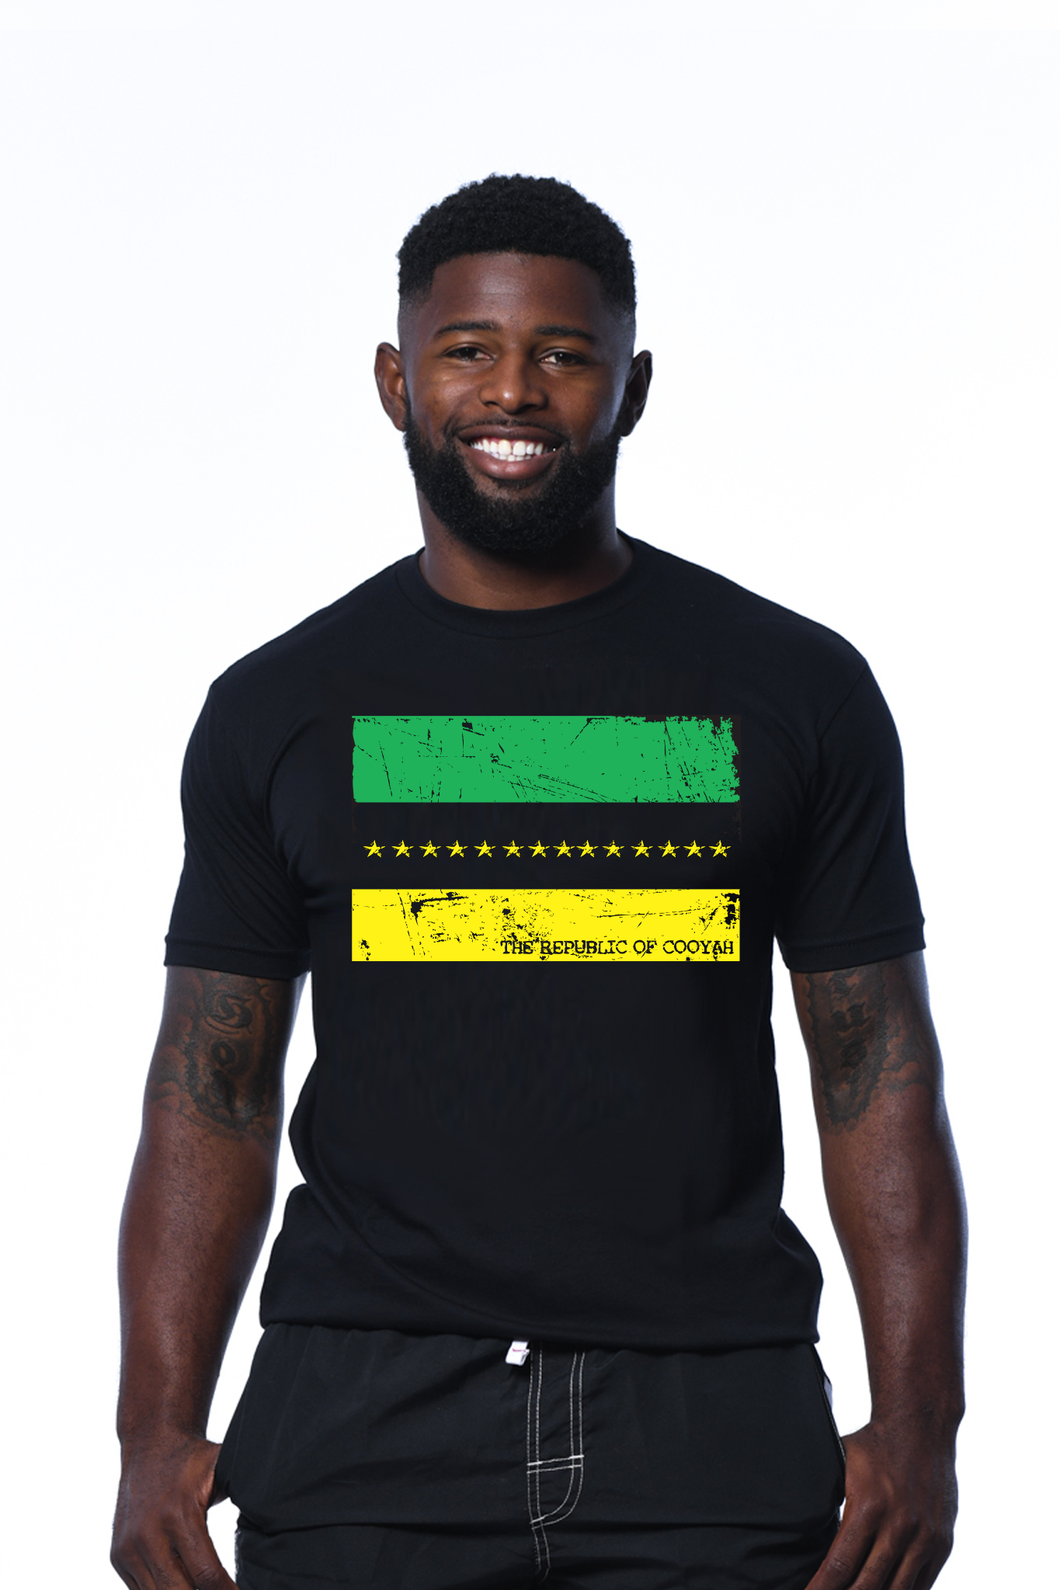 Cooyah Jamaica.  Men's 14 Star Republic tee.  Short sleeves, screen printed in Jamaican colors with a vintage style print.  Ringspun cotton.  Reggae clothing